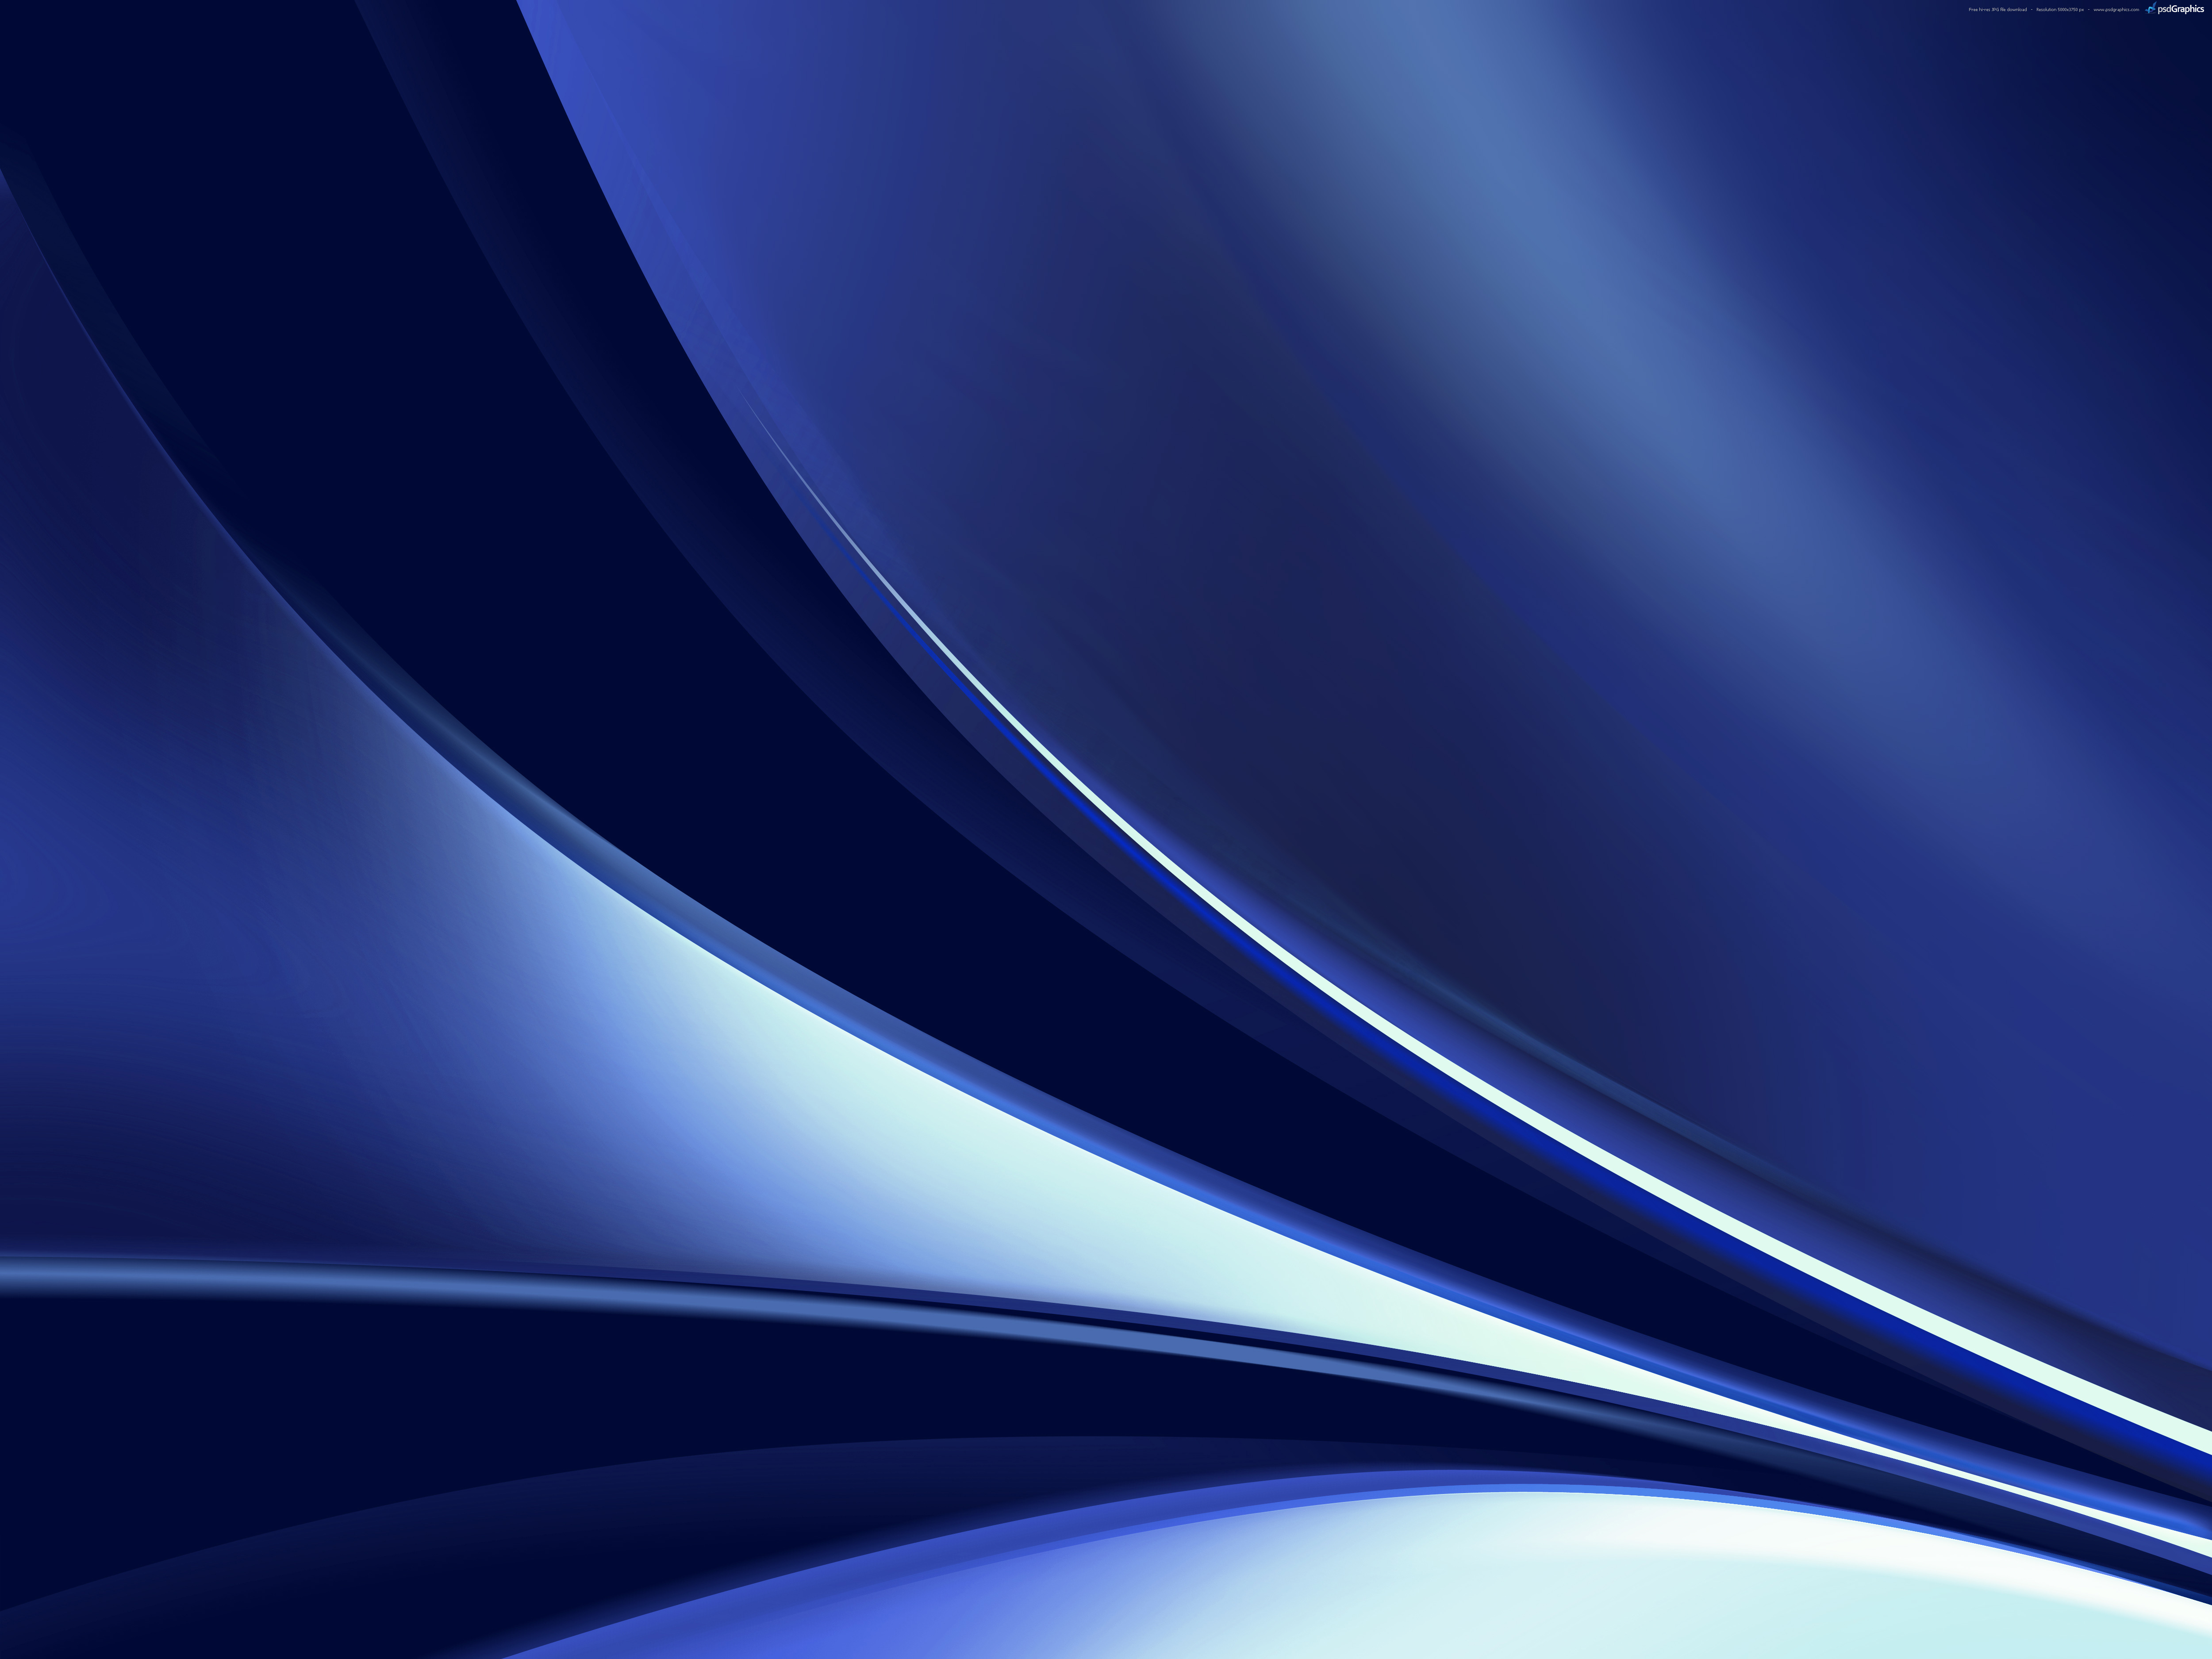 Dark Blue and Silver Abstract Background